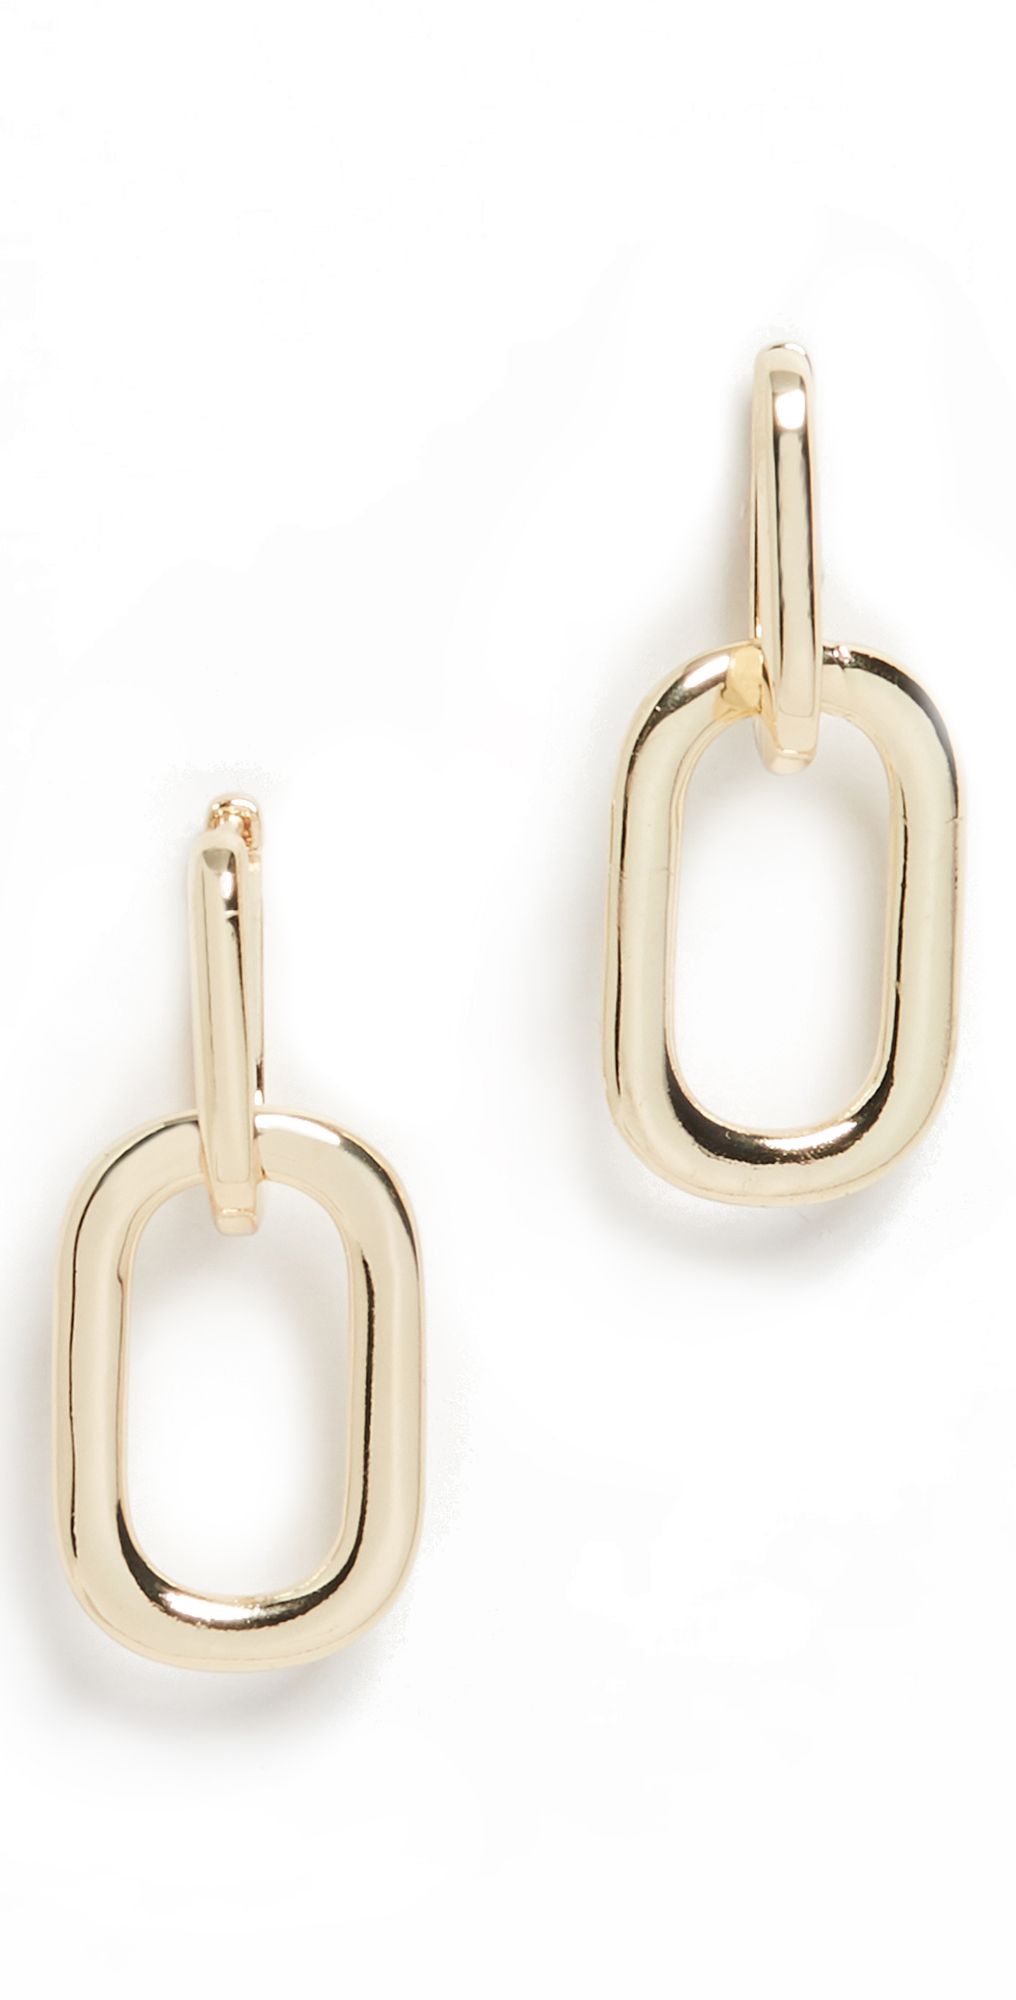 Double Layer Smooth Oval Drop Earrings | Shopbop